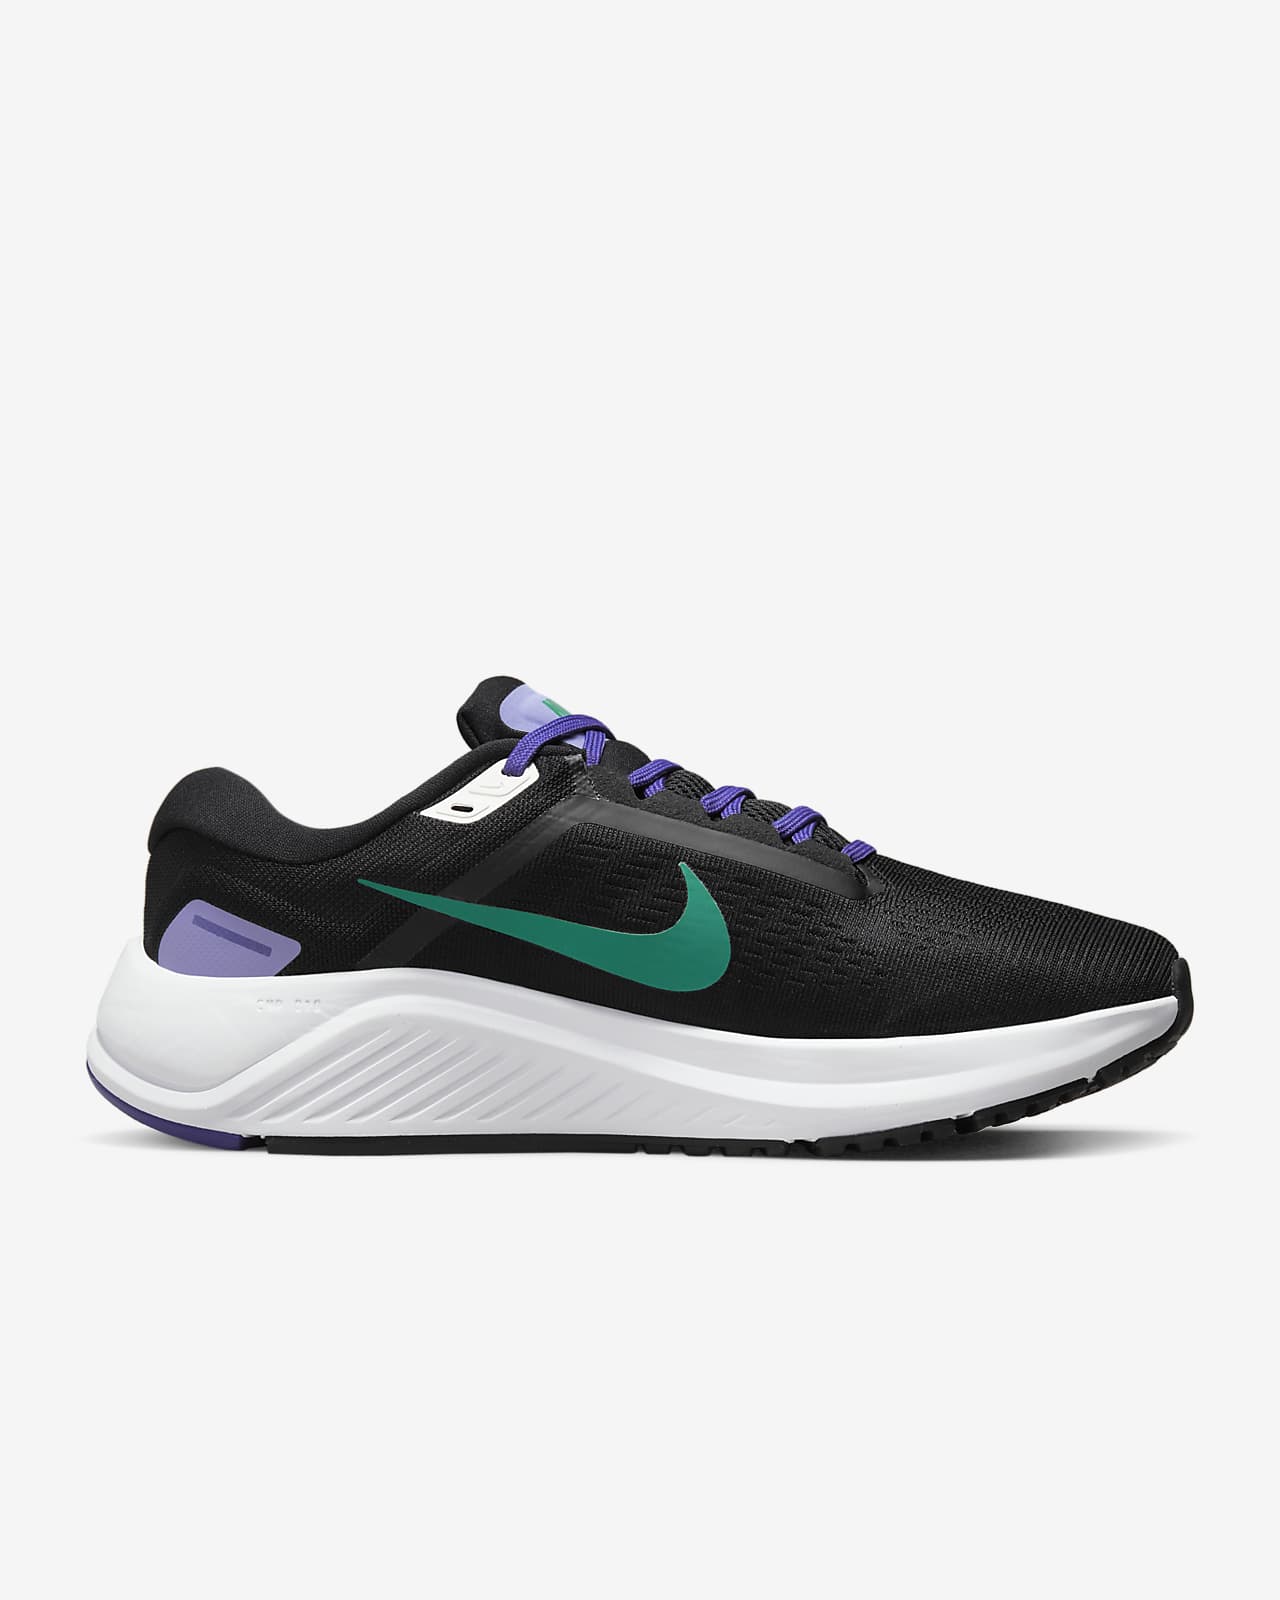 Nike Structure 24 Women's Road Running Shoes.